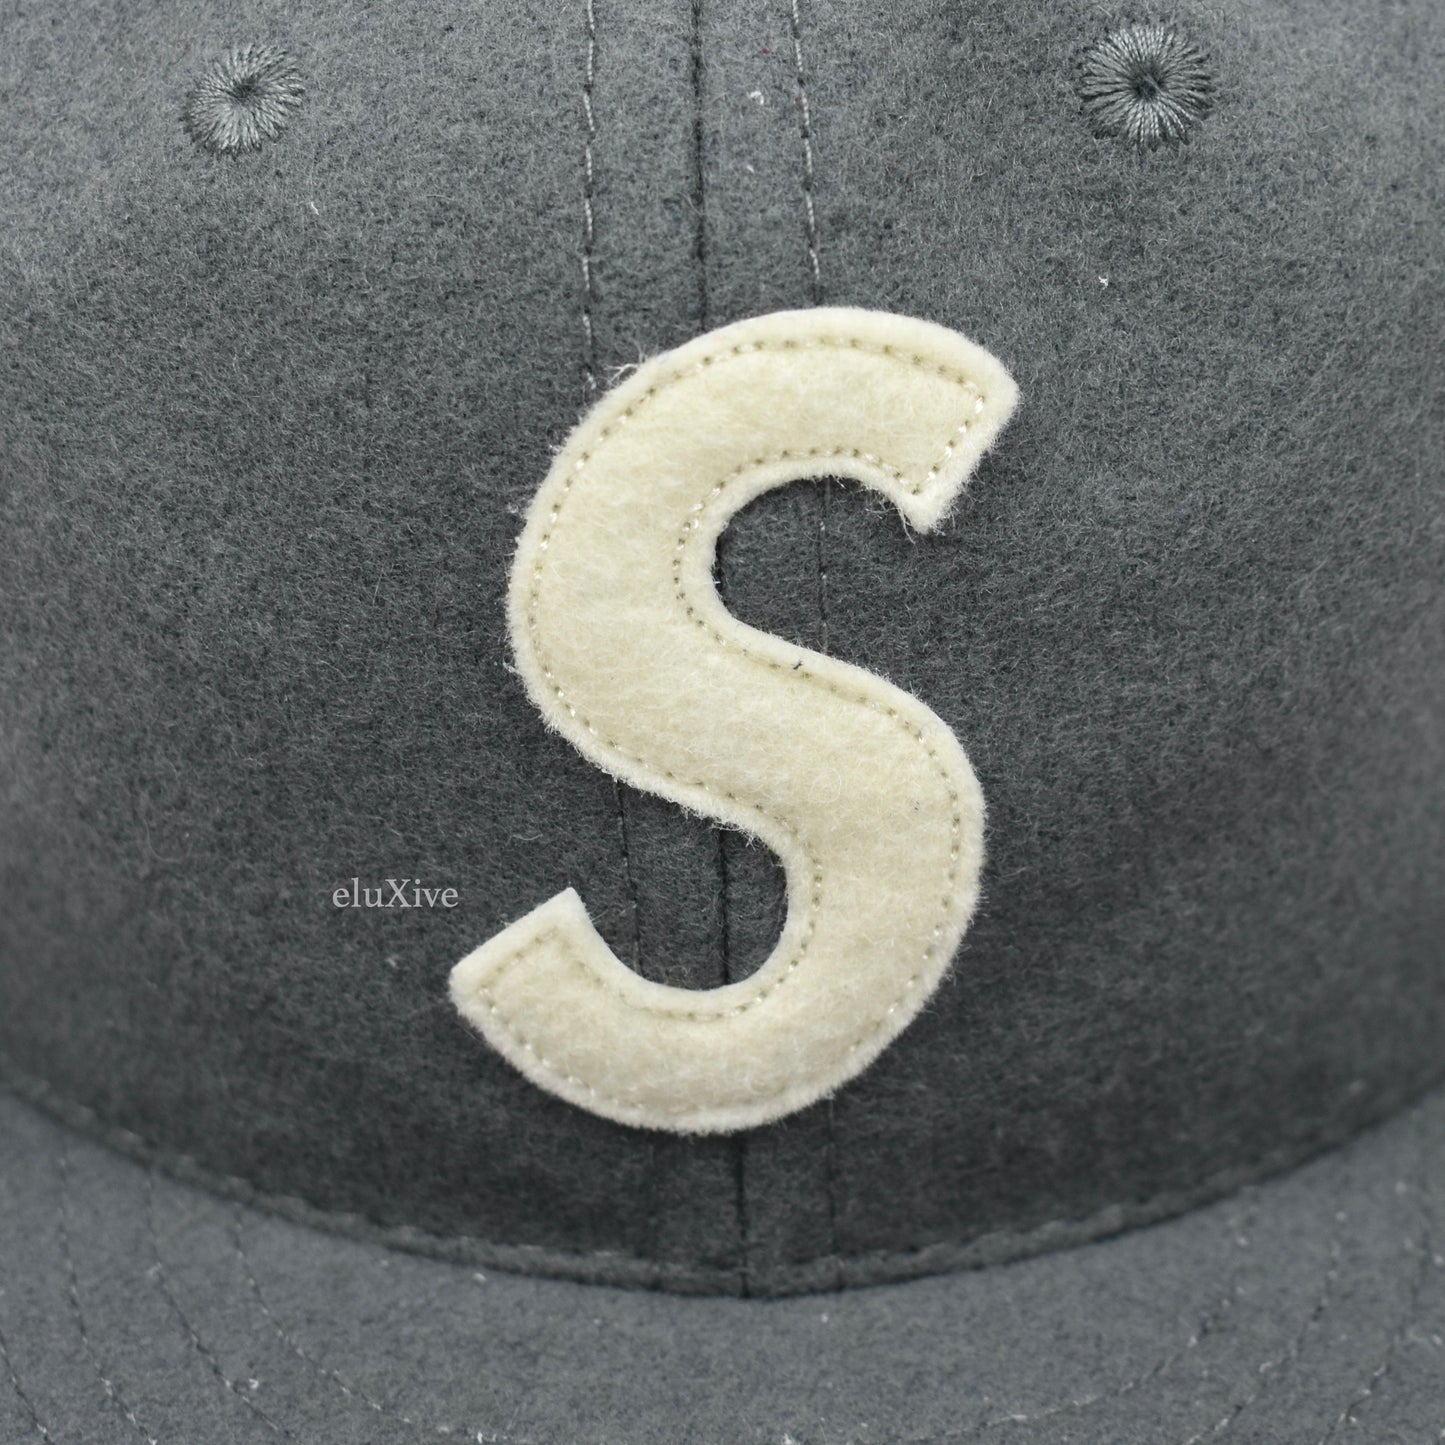 Supreme x Ebbets Field Flannels - Gray Wool S-Logo Fitted Hat